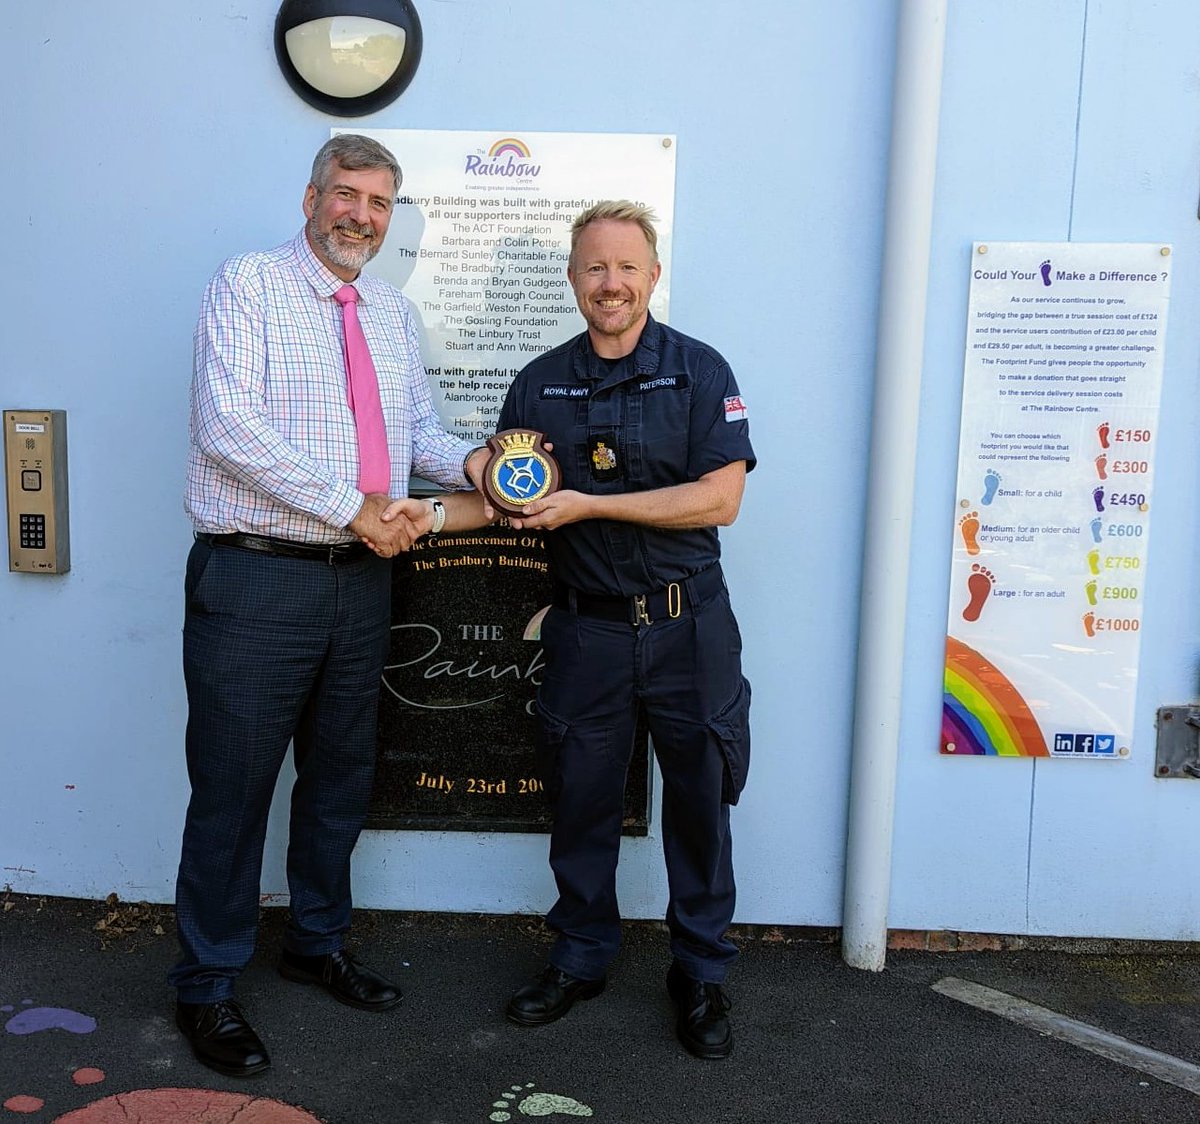 Whilst on our Middle East deployment, every member of our Crew chose to either row, run, swim or cycle 37km to raise money for the Rainbow Centre Charity. Today ex-Crew 1 MEO WO1 Paterson went to the Rainbow Centre in Fareham to present a HMS Chiddingfold crest. #OpKipion